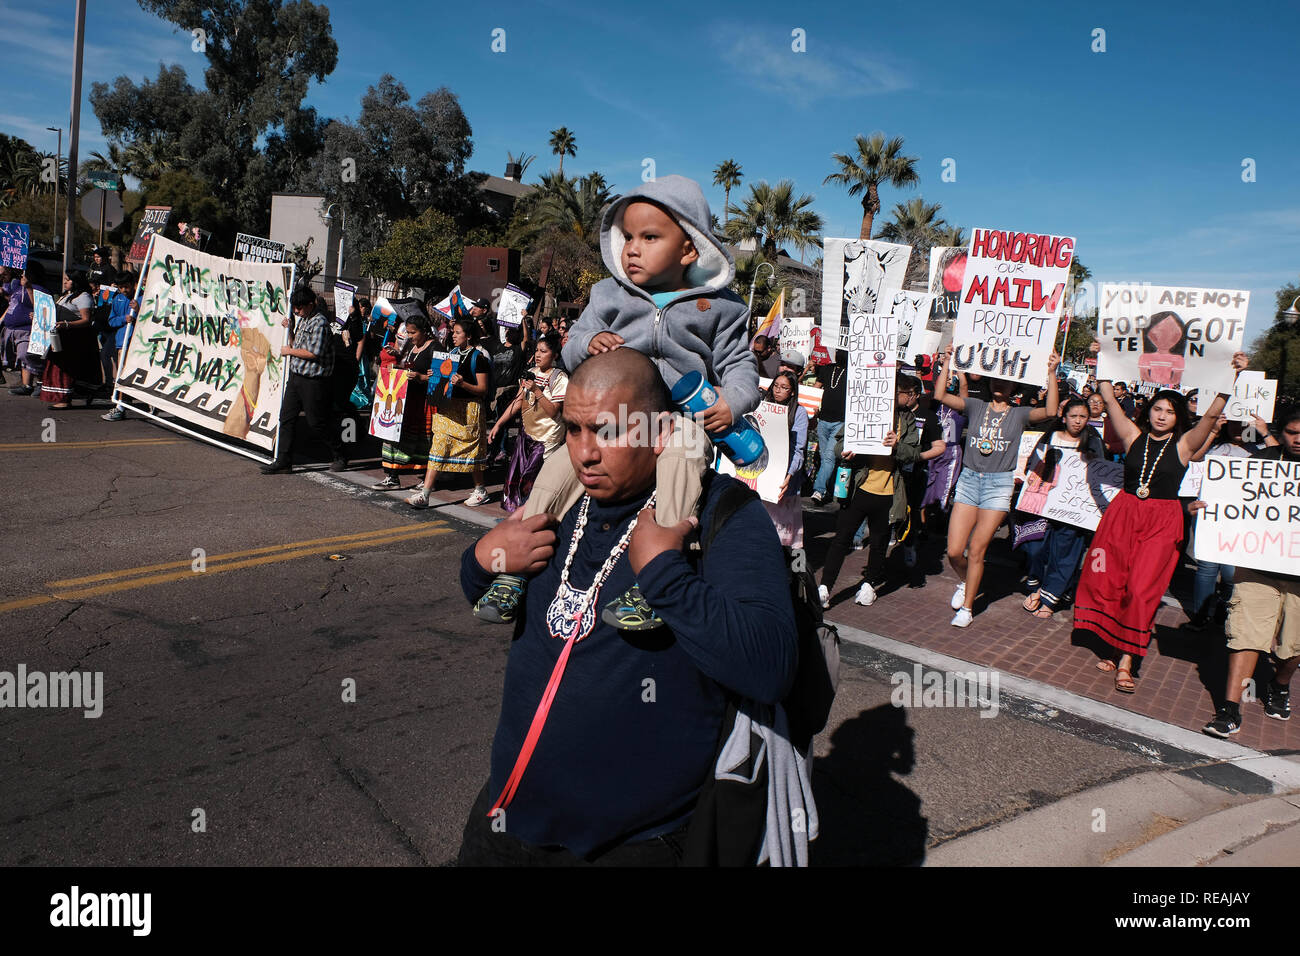 Tucson, Arizona, USA. 20th Jan, 2019. A crowd of 15,000 took part in the Woman's March in Tucson. Protesters rallied for woman's rights and against Trumps policies that are harmful to women. They were lead by members of the Tohono O'odham nation. Credit: Christopher Brown/ZUMA Wire/Alamy Live News Stock Photo